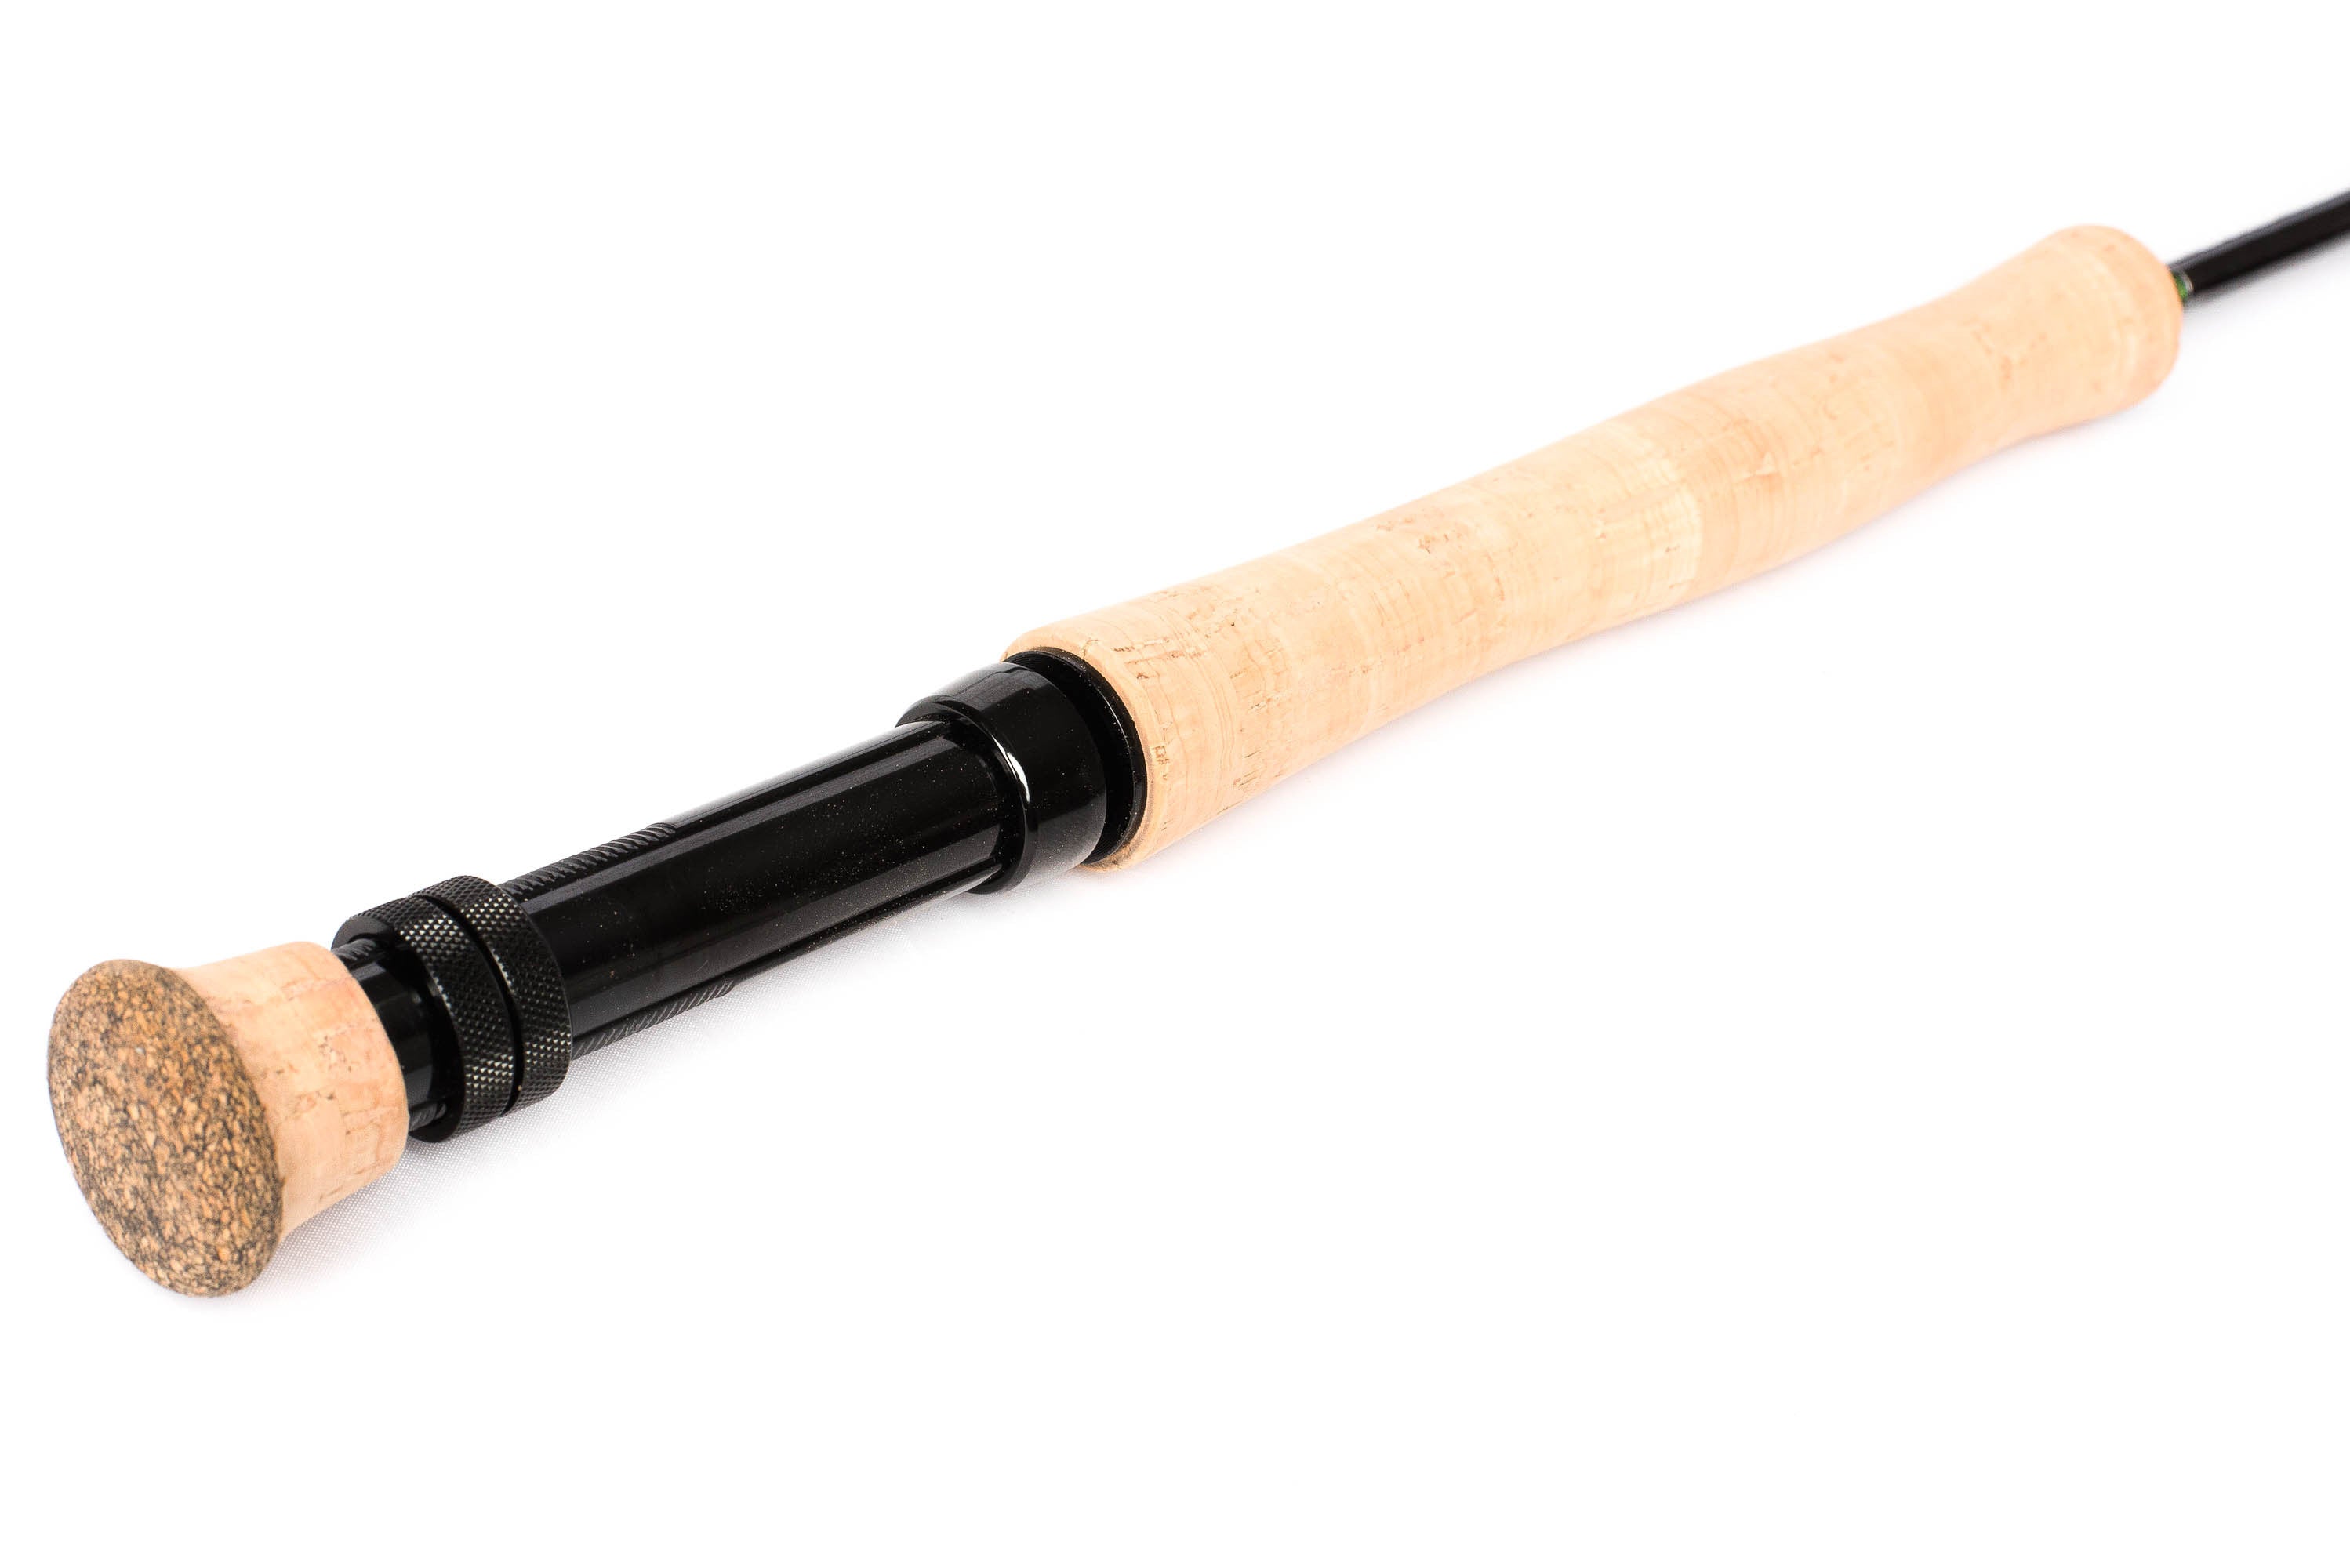 9wt Fly Rod Built By Randy Towe 9ft 9wt (4piece), 52% OFF